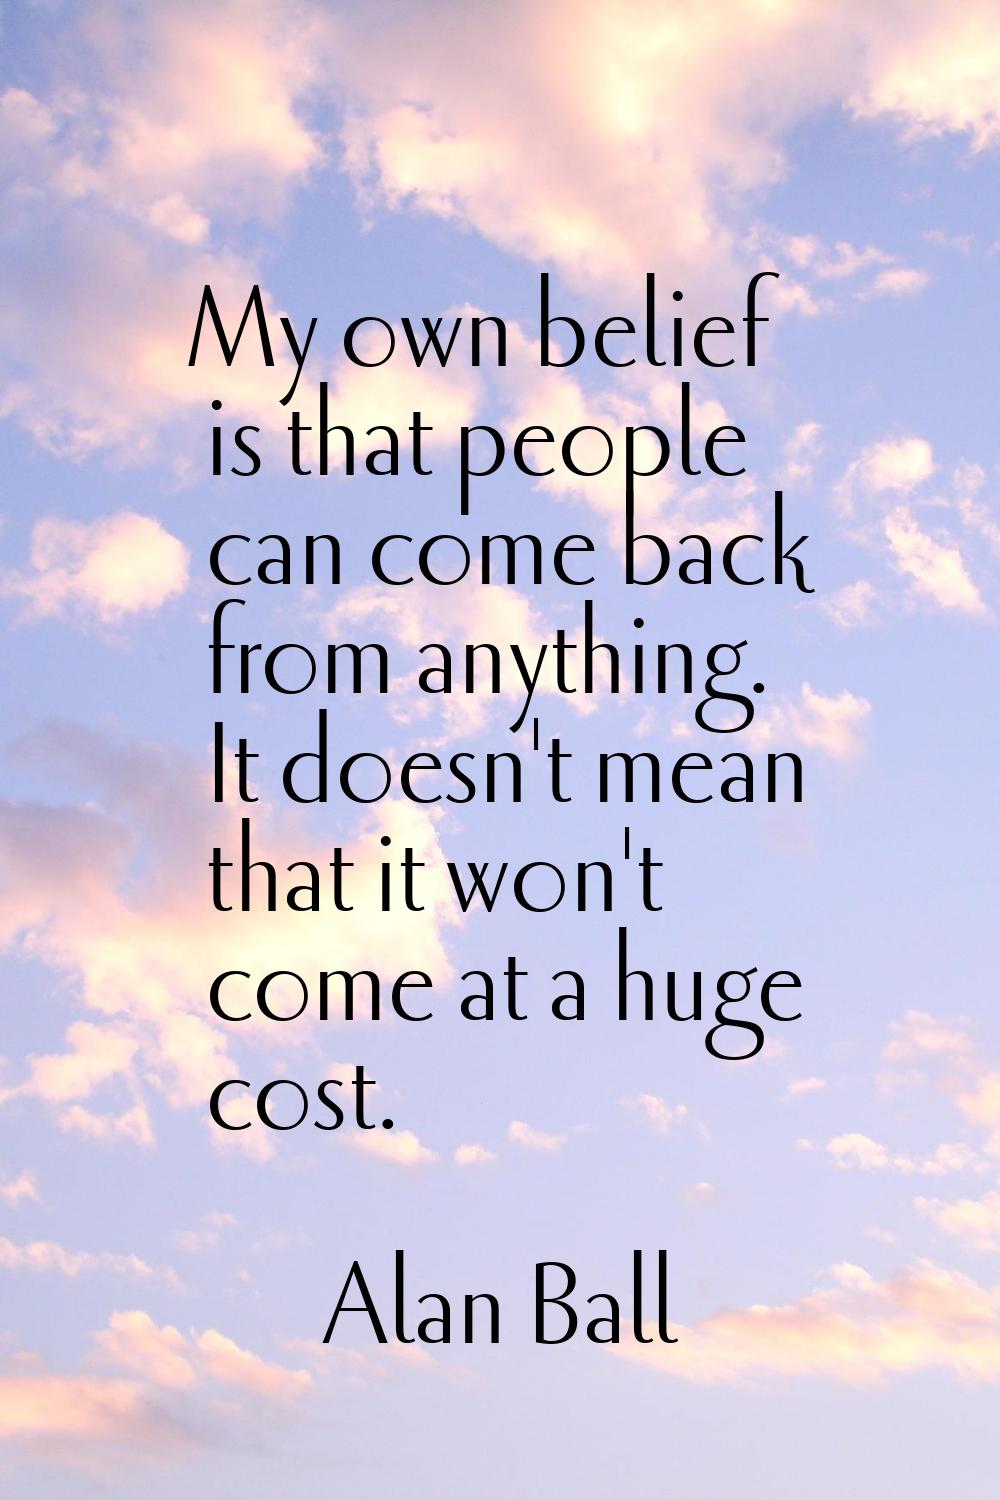 My own belief is that people can come back from anything. It doesn't mean that it won't come at a h